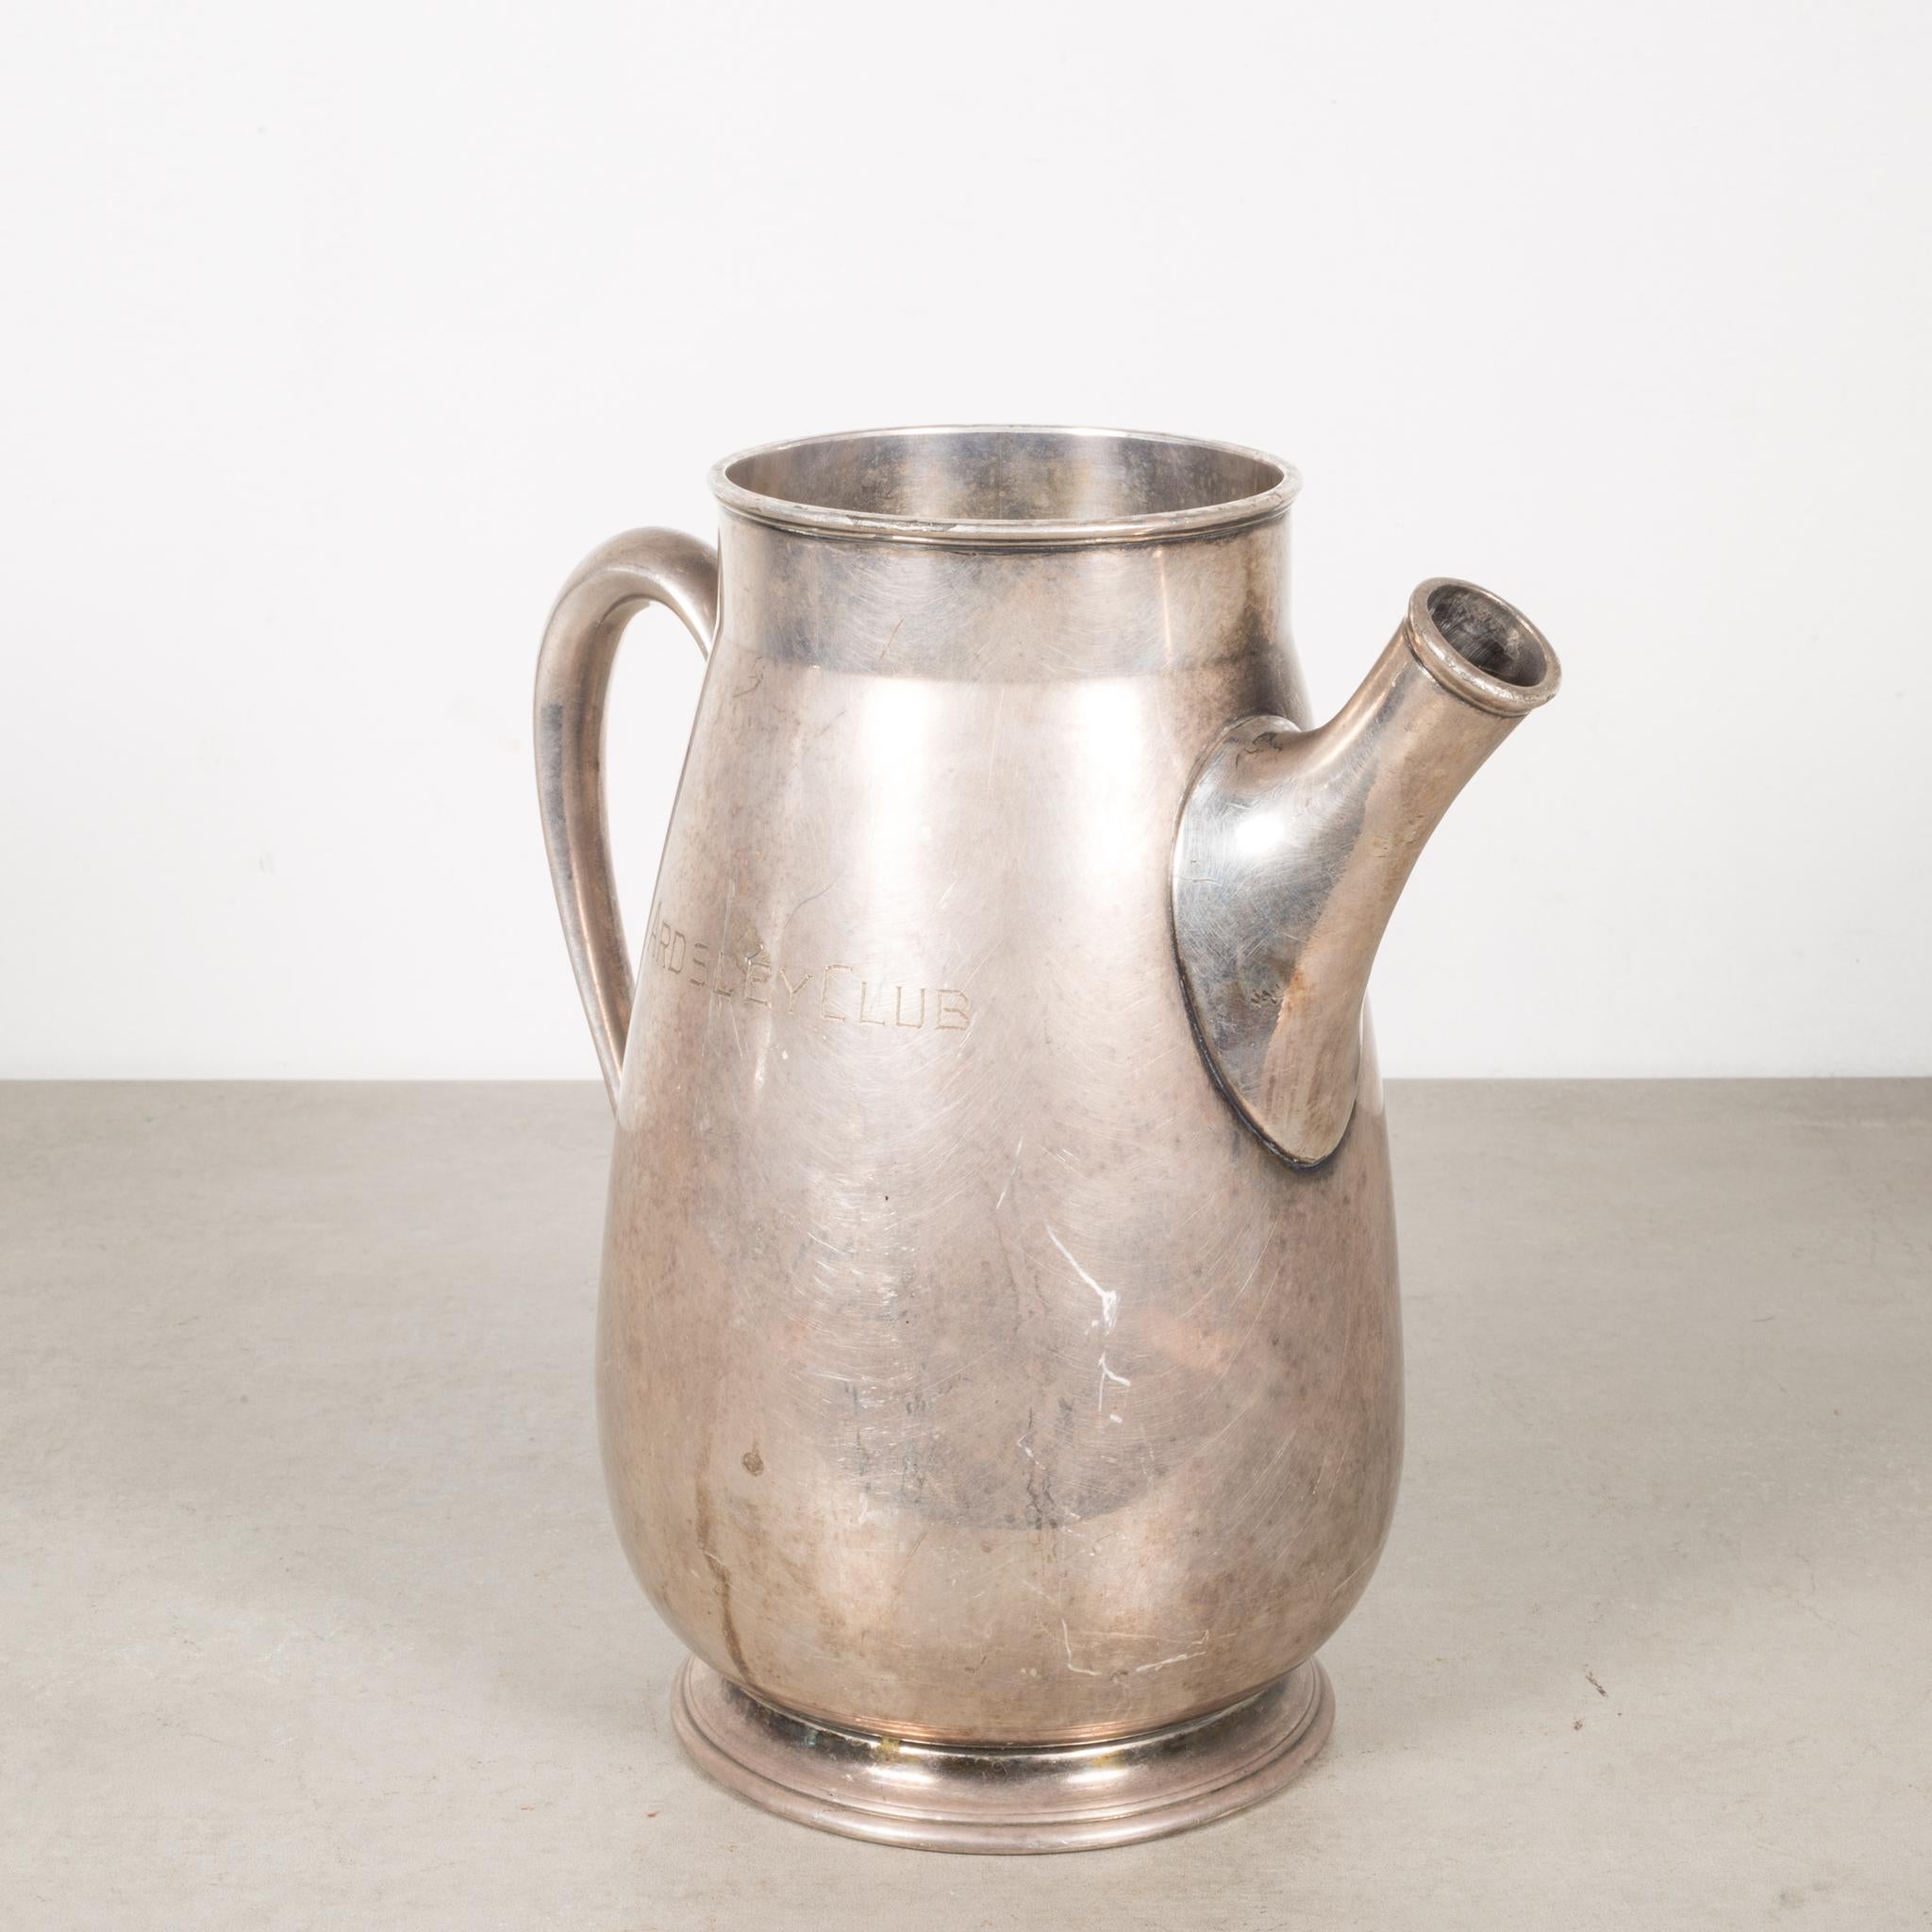 About:

This is an original silver plated pitcher trophy with 